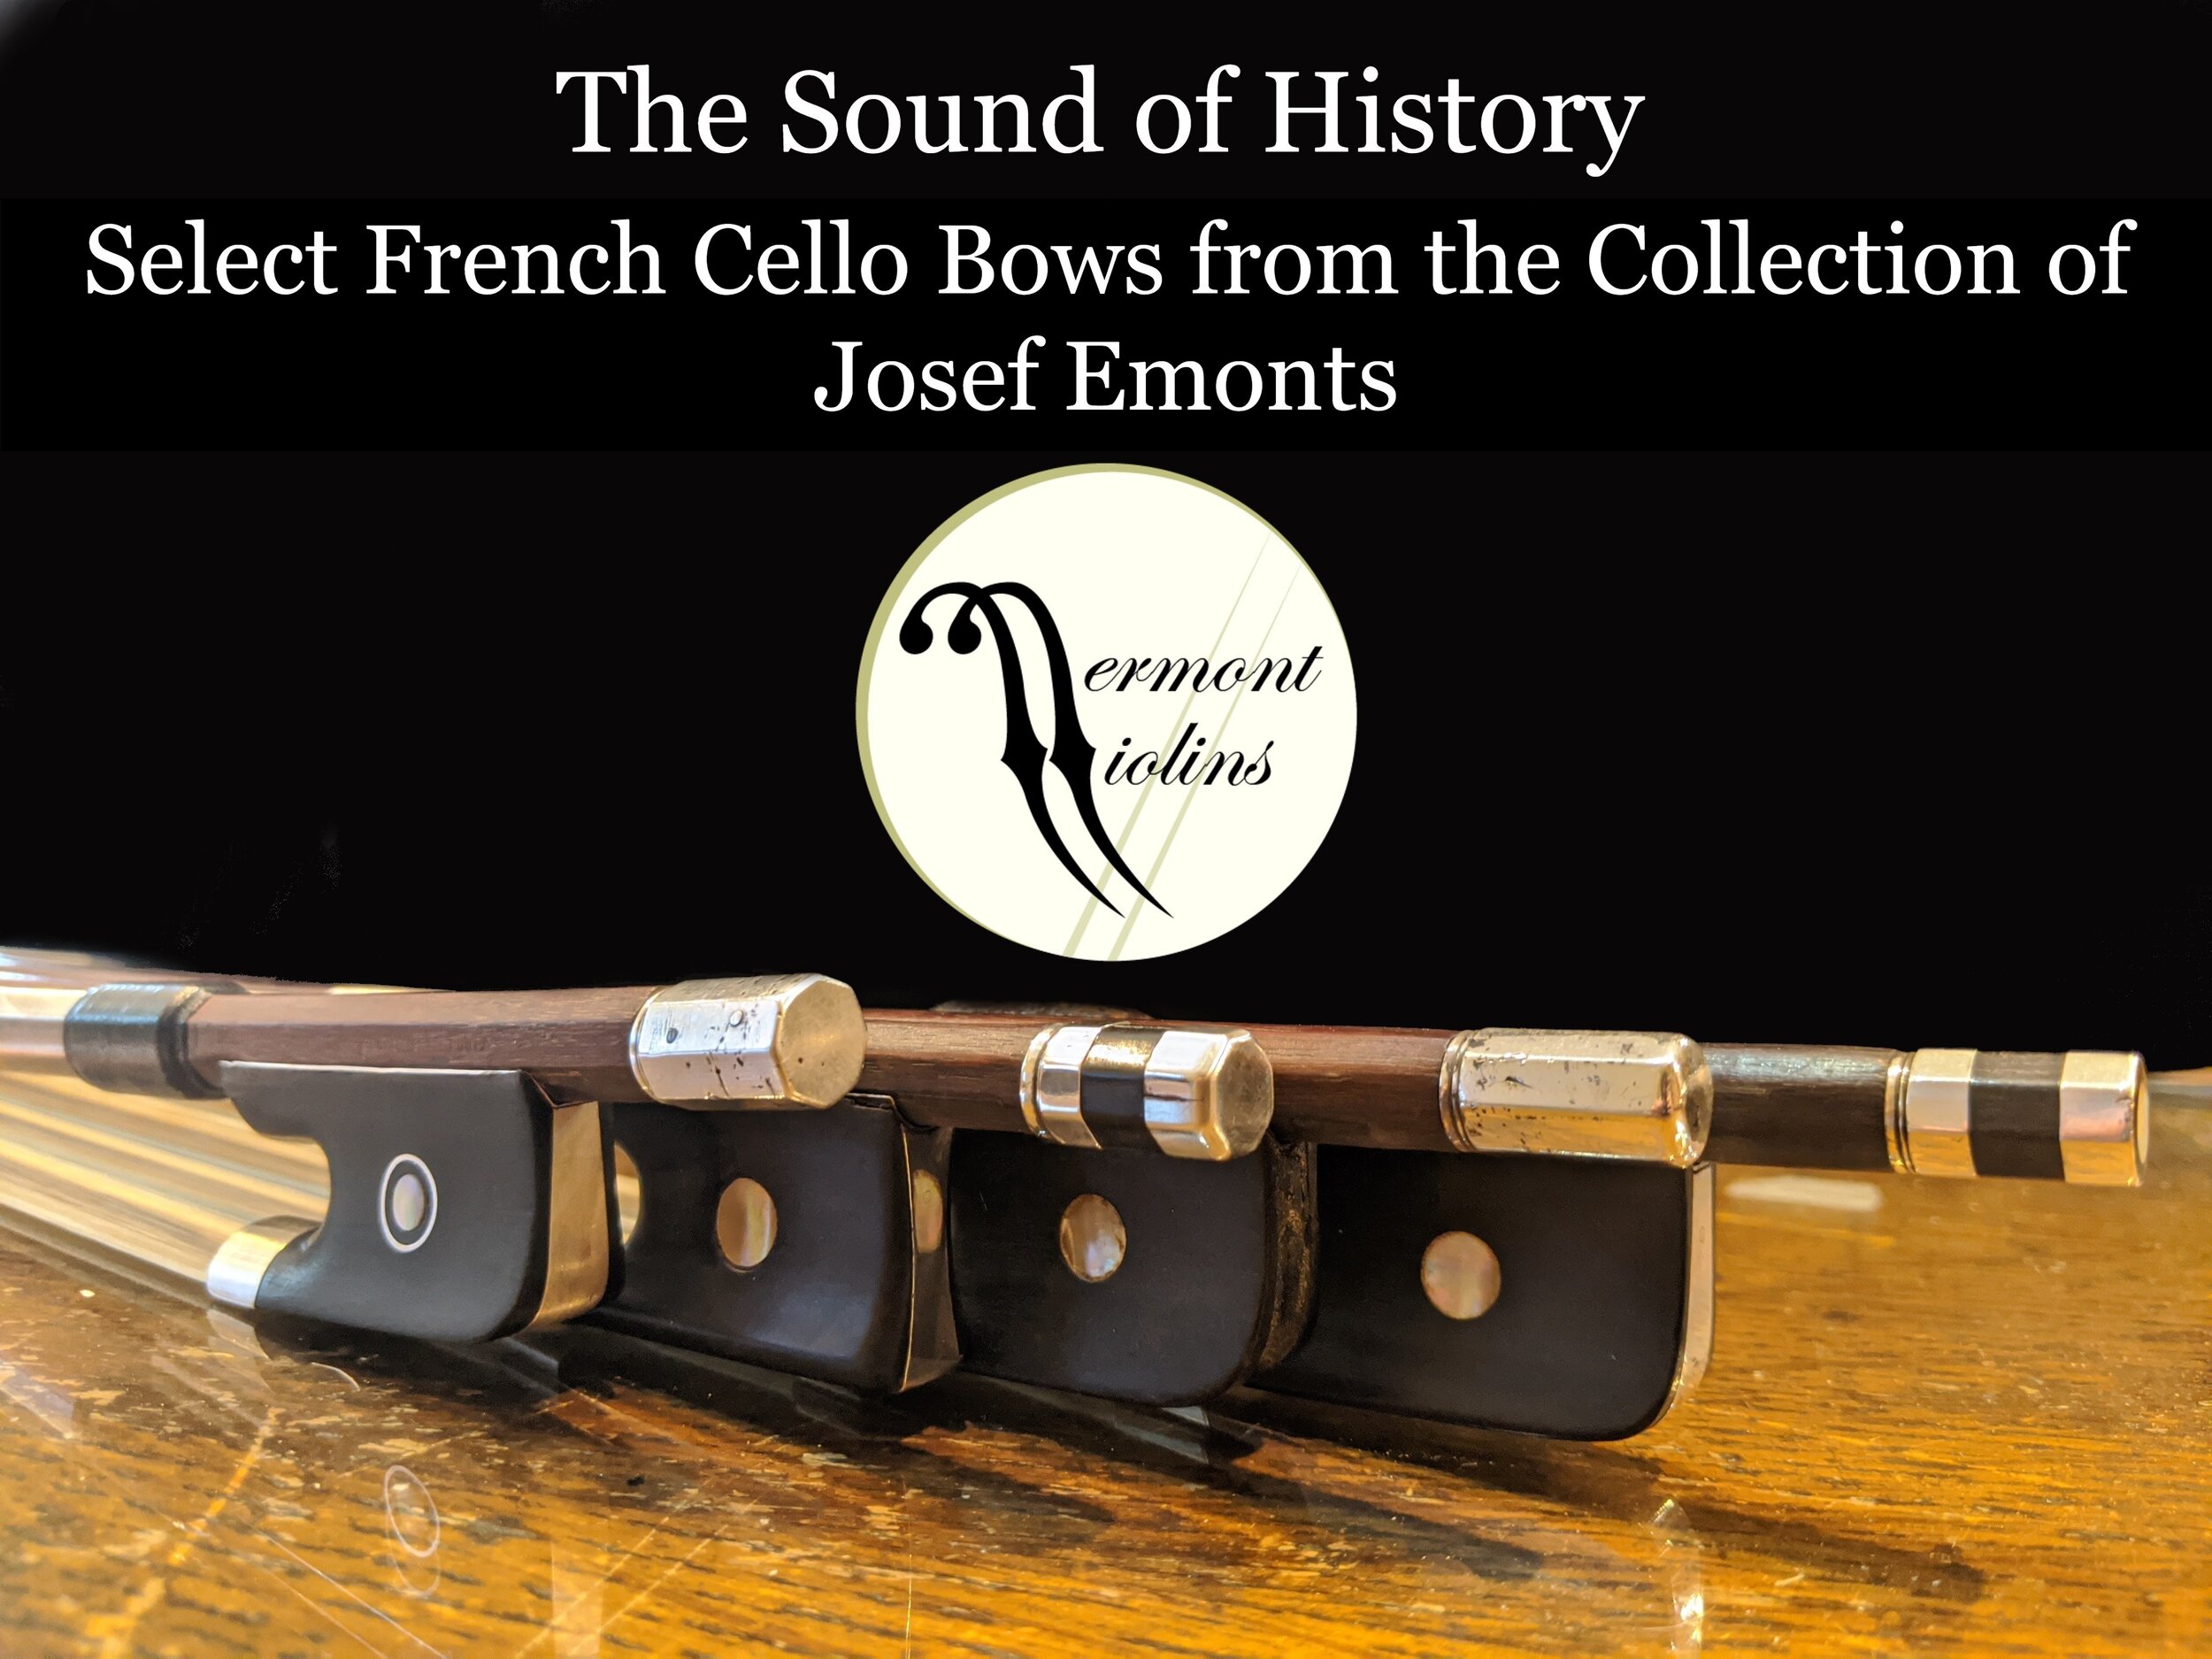 josef emonts collection